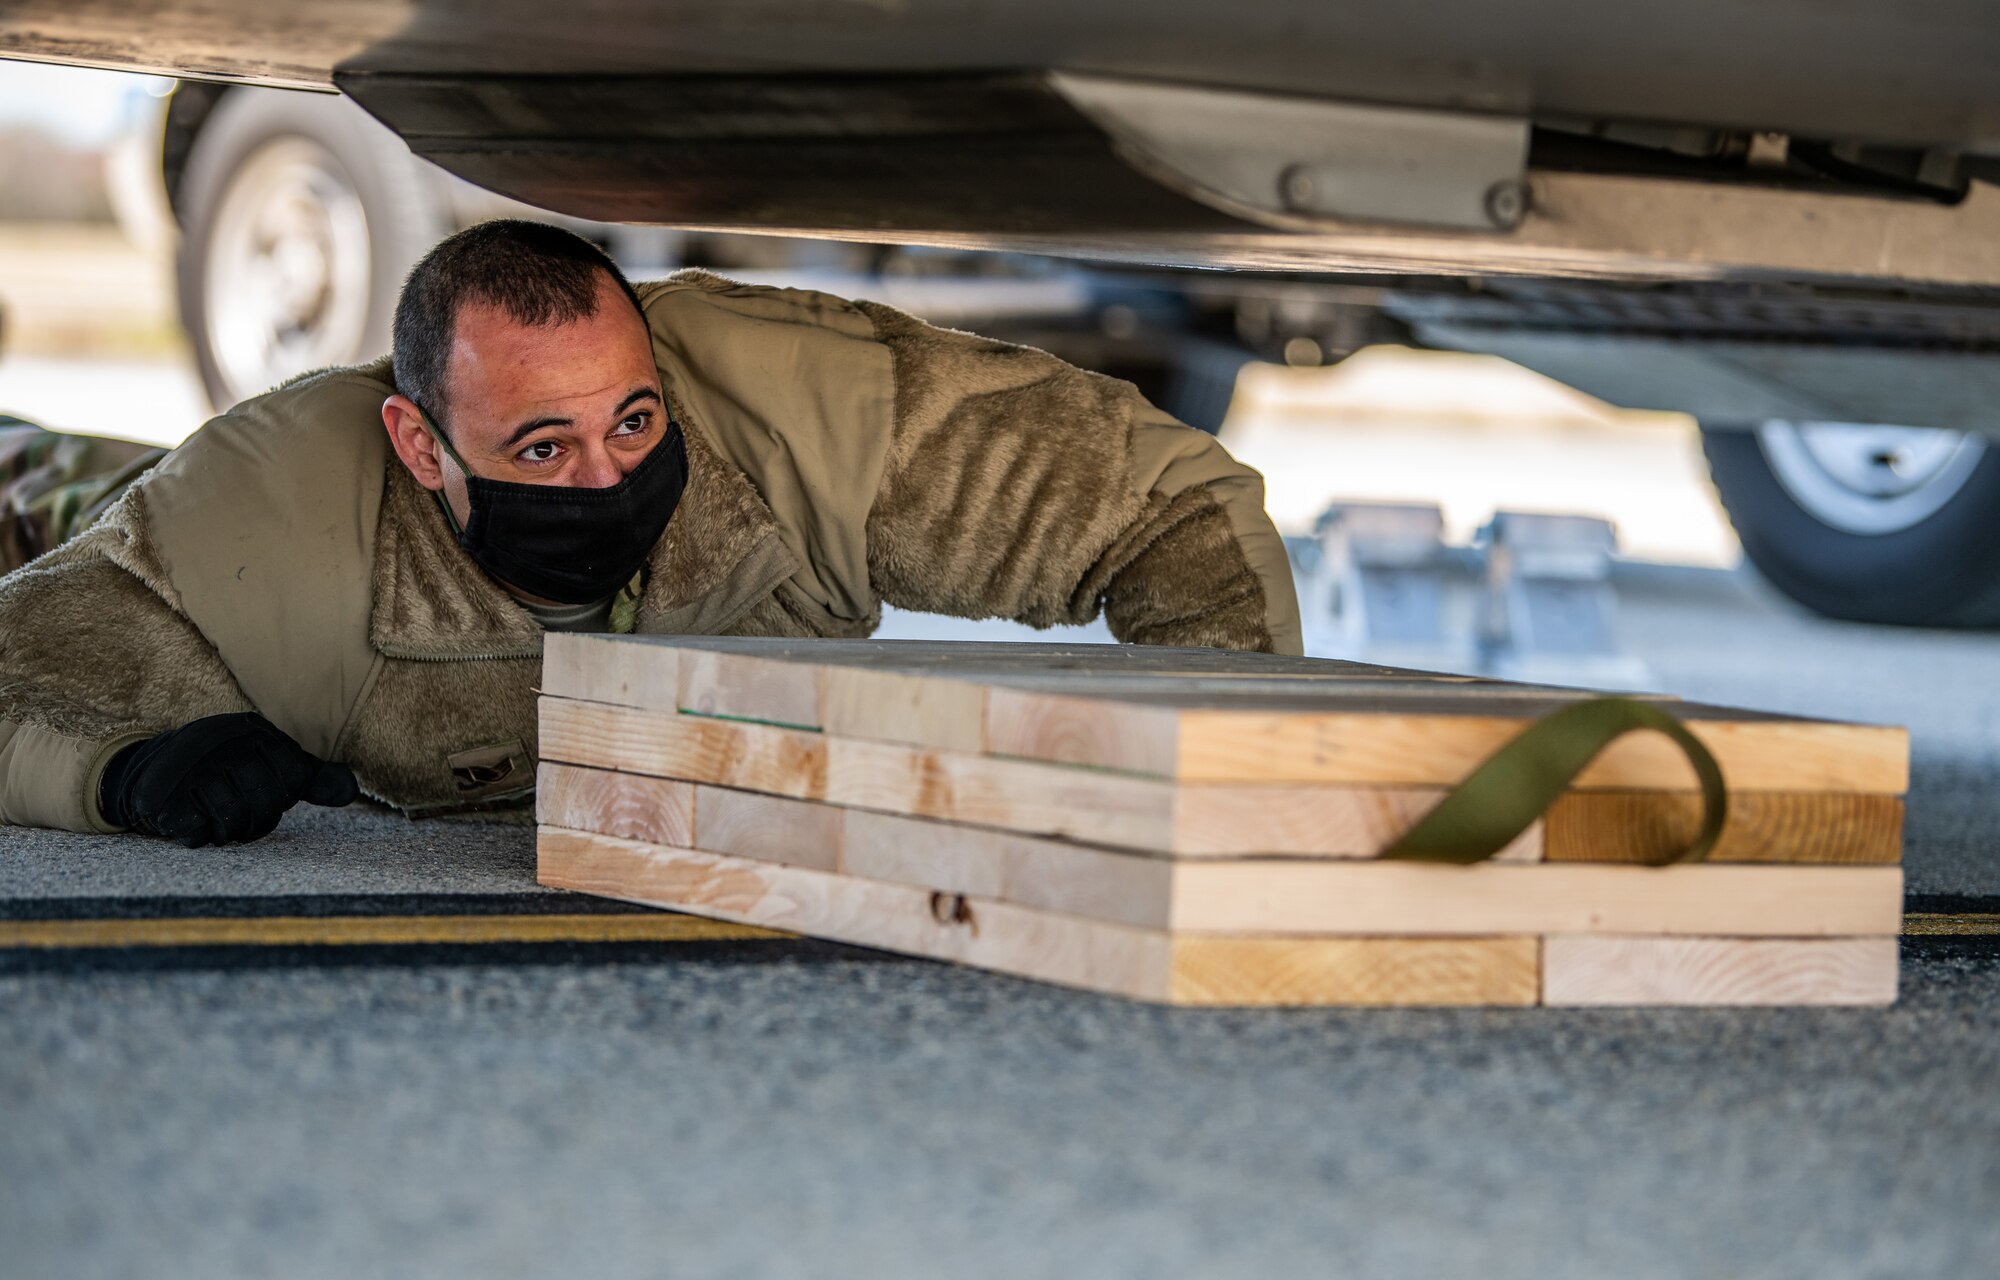 Staff Sgt. Jonathan Enriquez Colin, 3rd Airlift Squadron loadmaster, places wood shoring under a C-17 Globemaster III during joint training at Dover Air Force Base, Delaware, March 29, 2021. The training focused on providing rapid global airlift through the integration of U.S. Air Force Airmen and Delaware National Guard Soldiers. (U.S. Air Force photo by Senior Airman Christopher Quail)